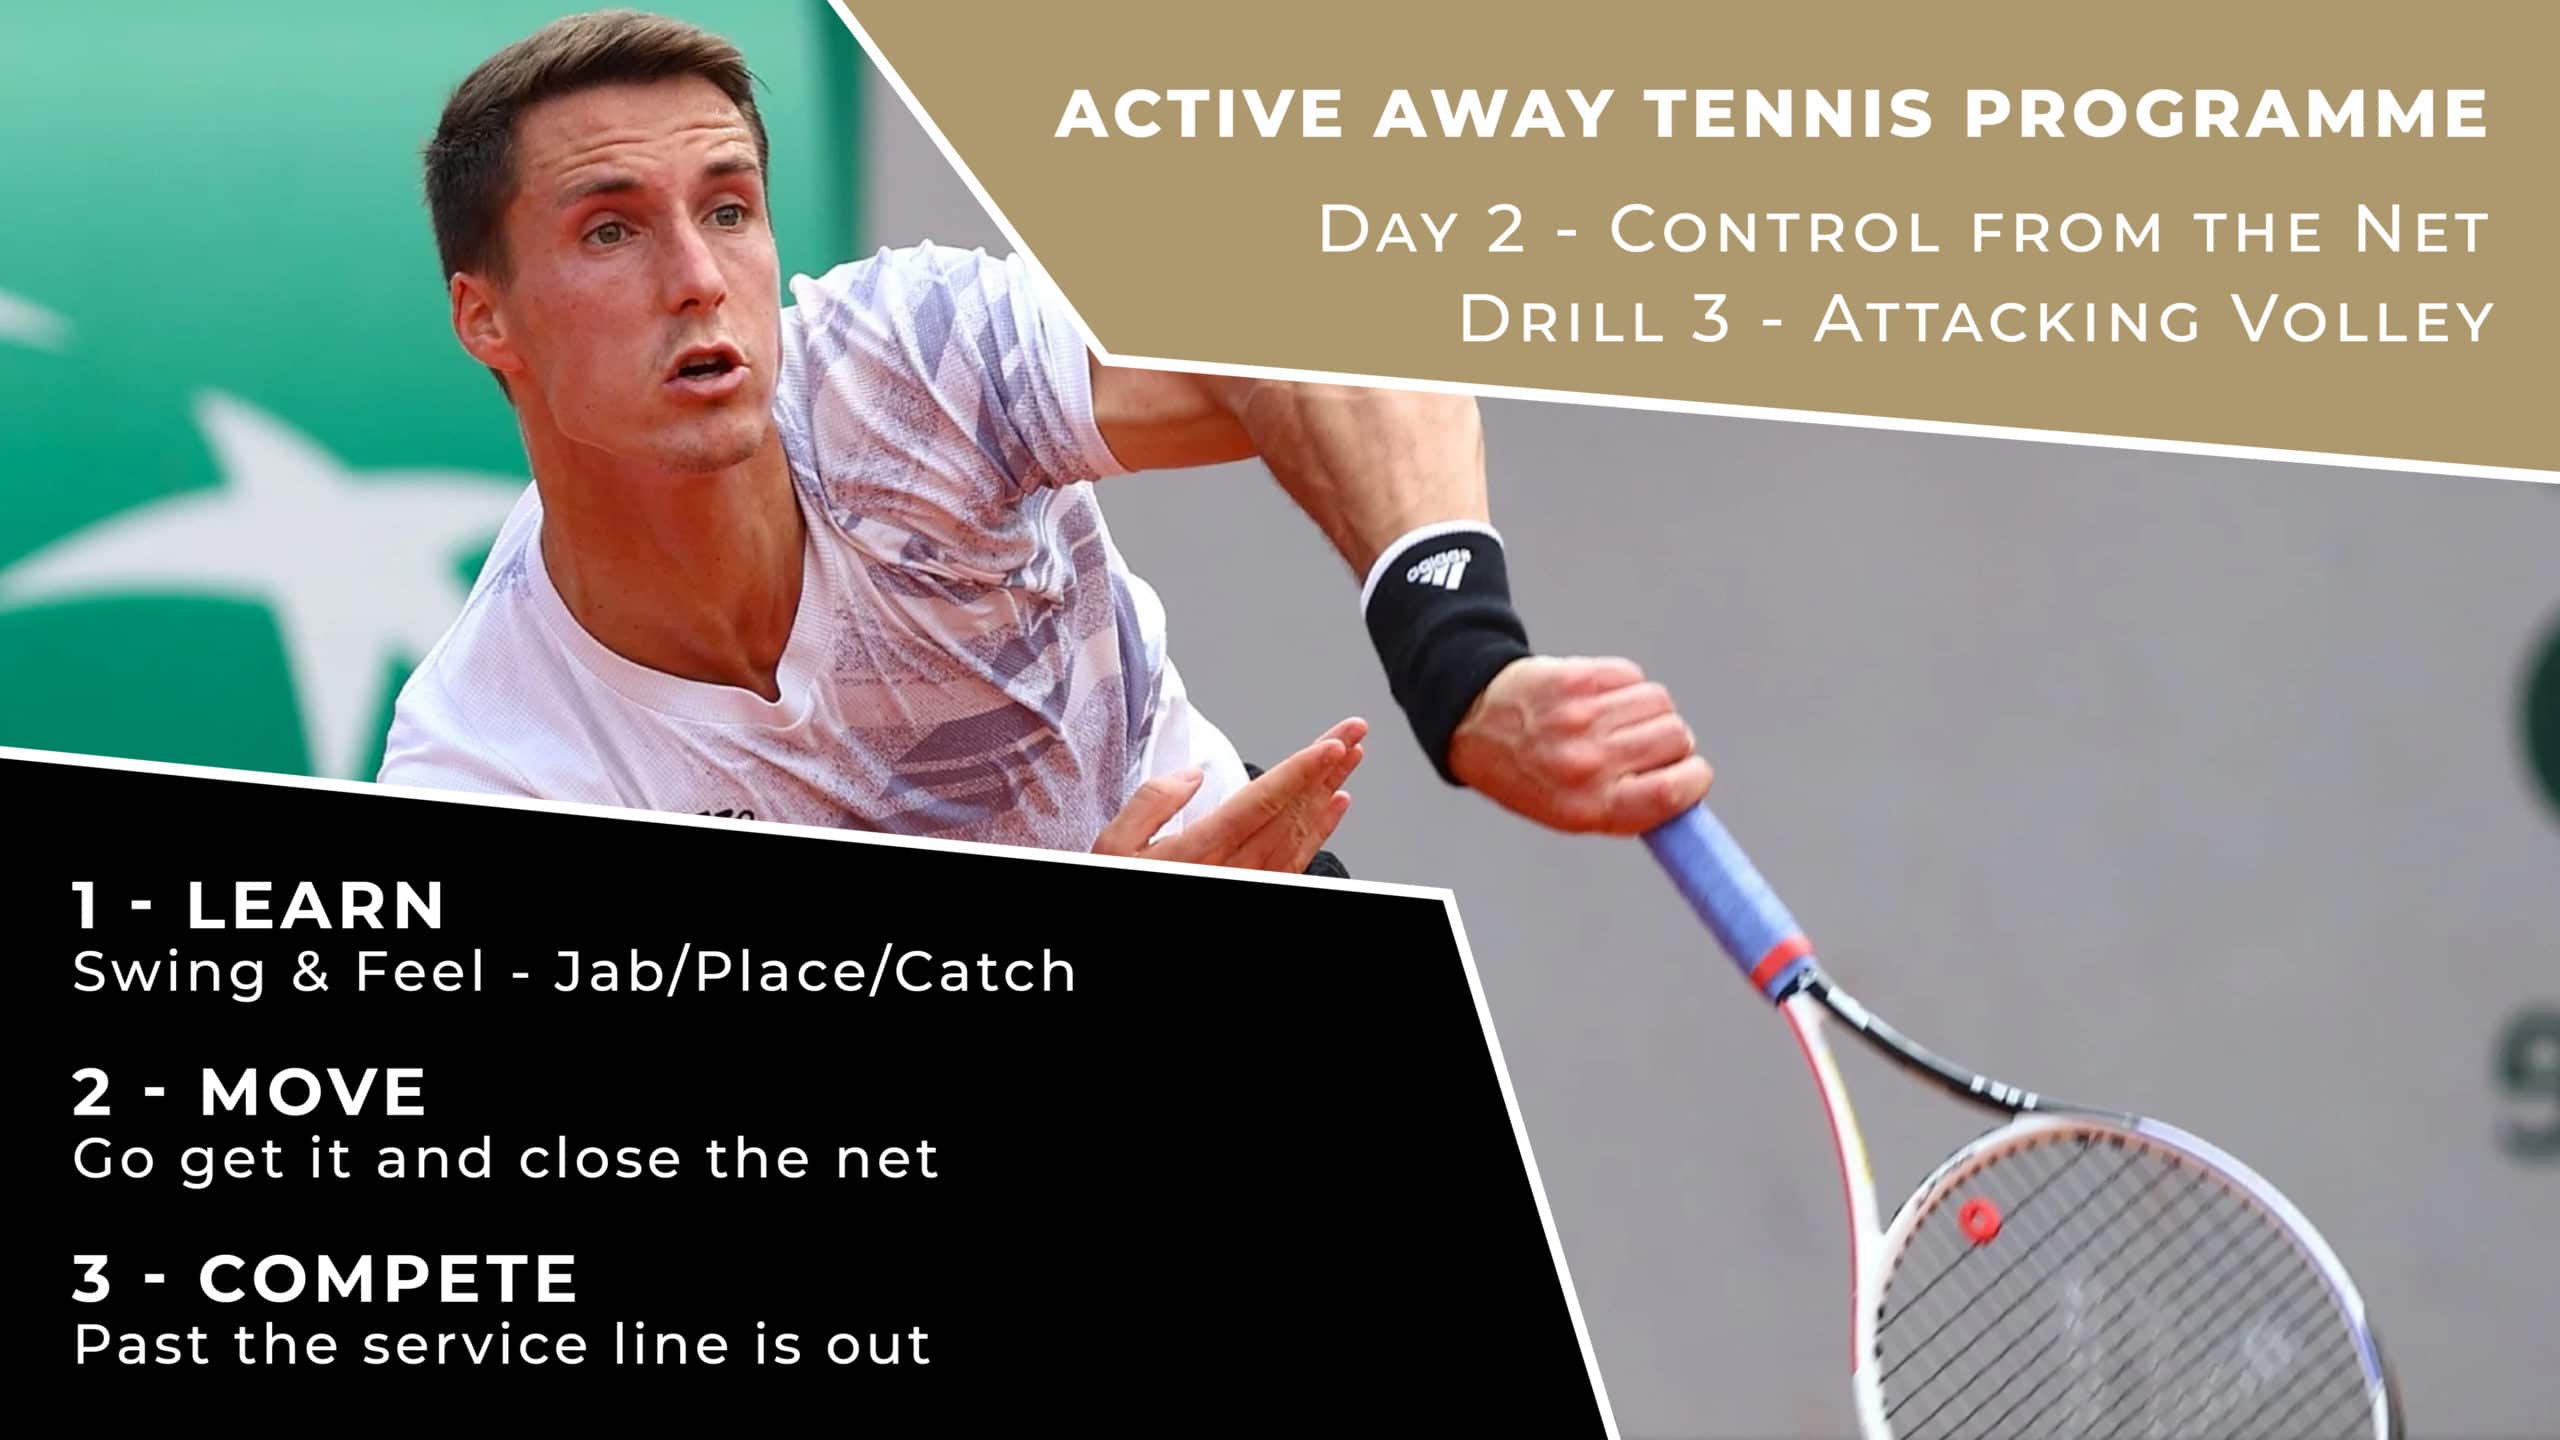 Day 2 - Control The Net Drill 3 - Attacking Volley | Active Away Tennis Programme